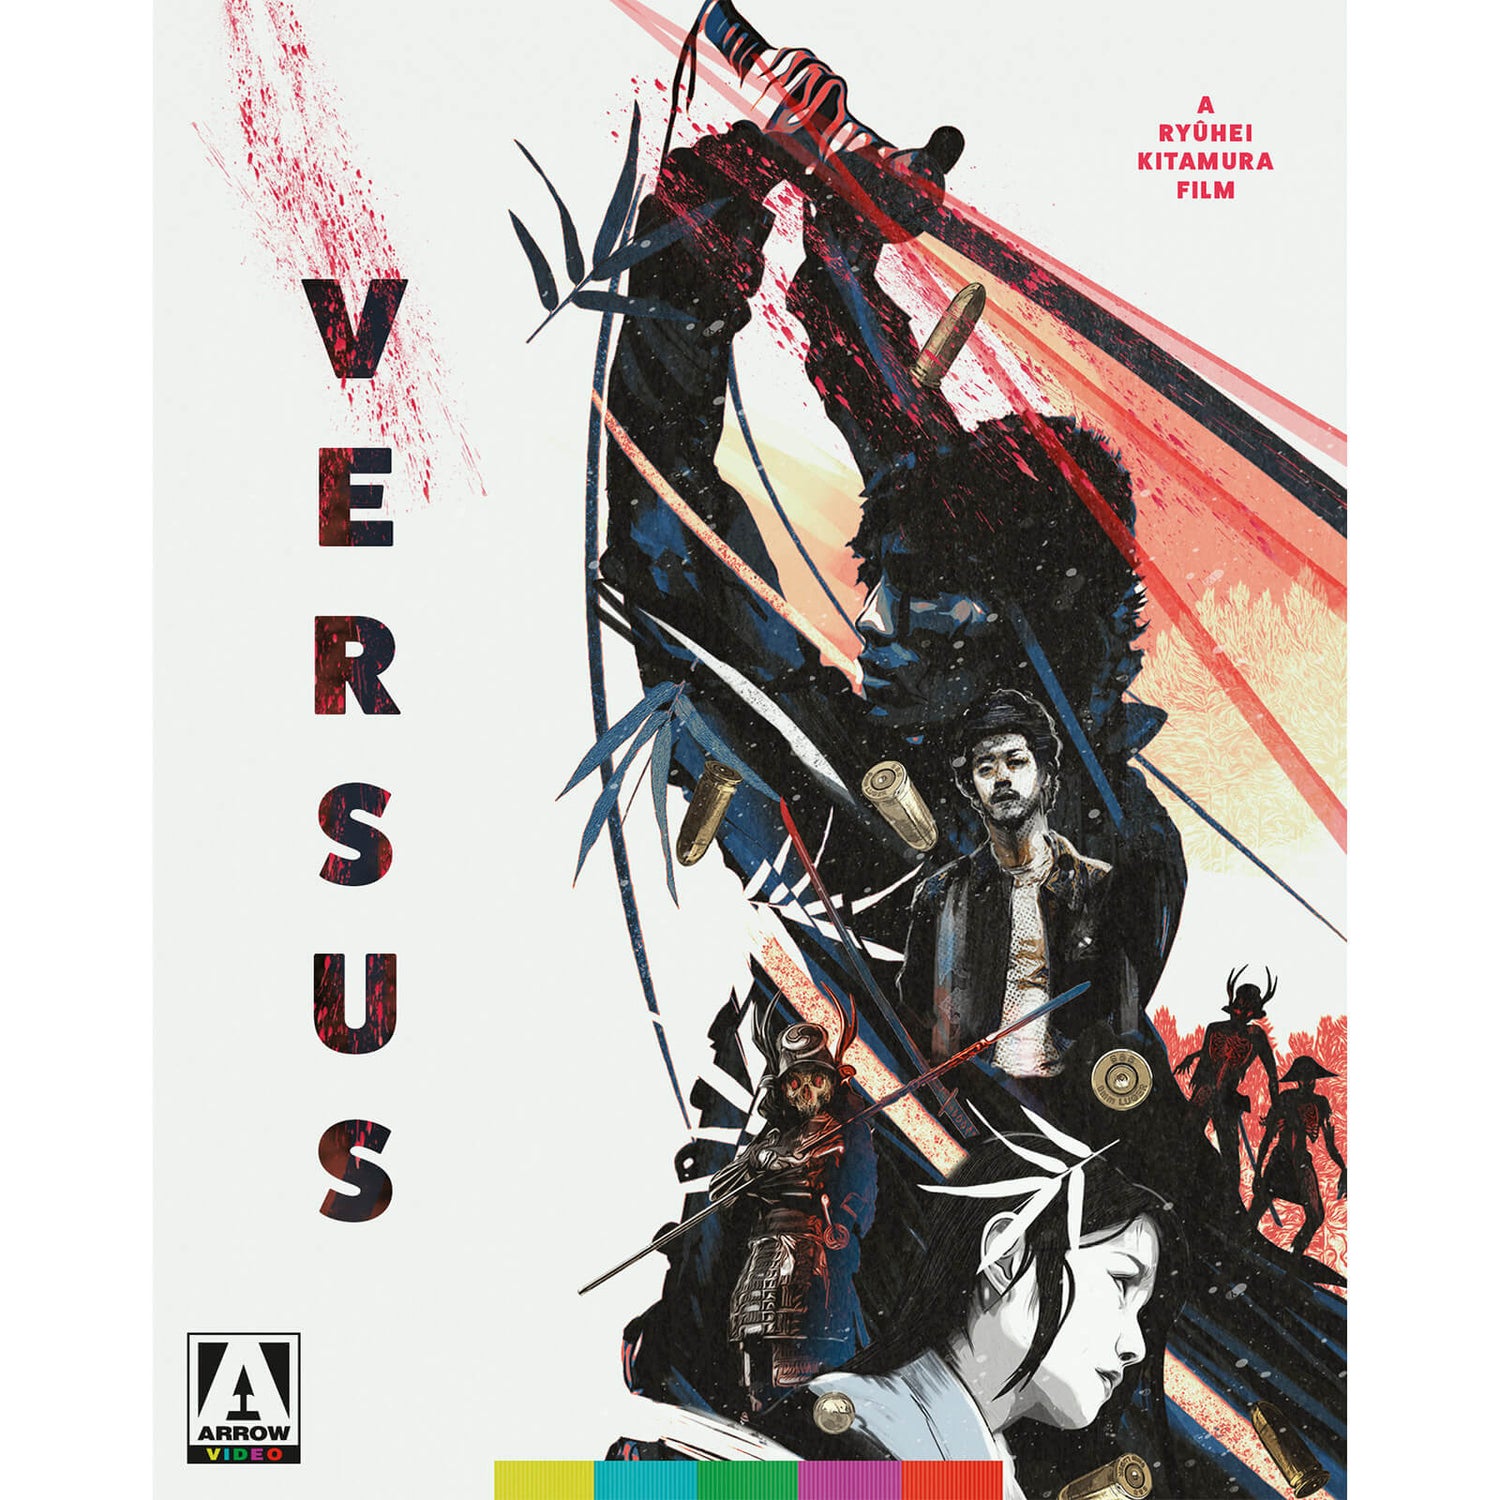 Versus Limited Edition Blu-ray